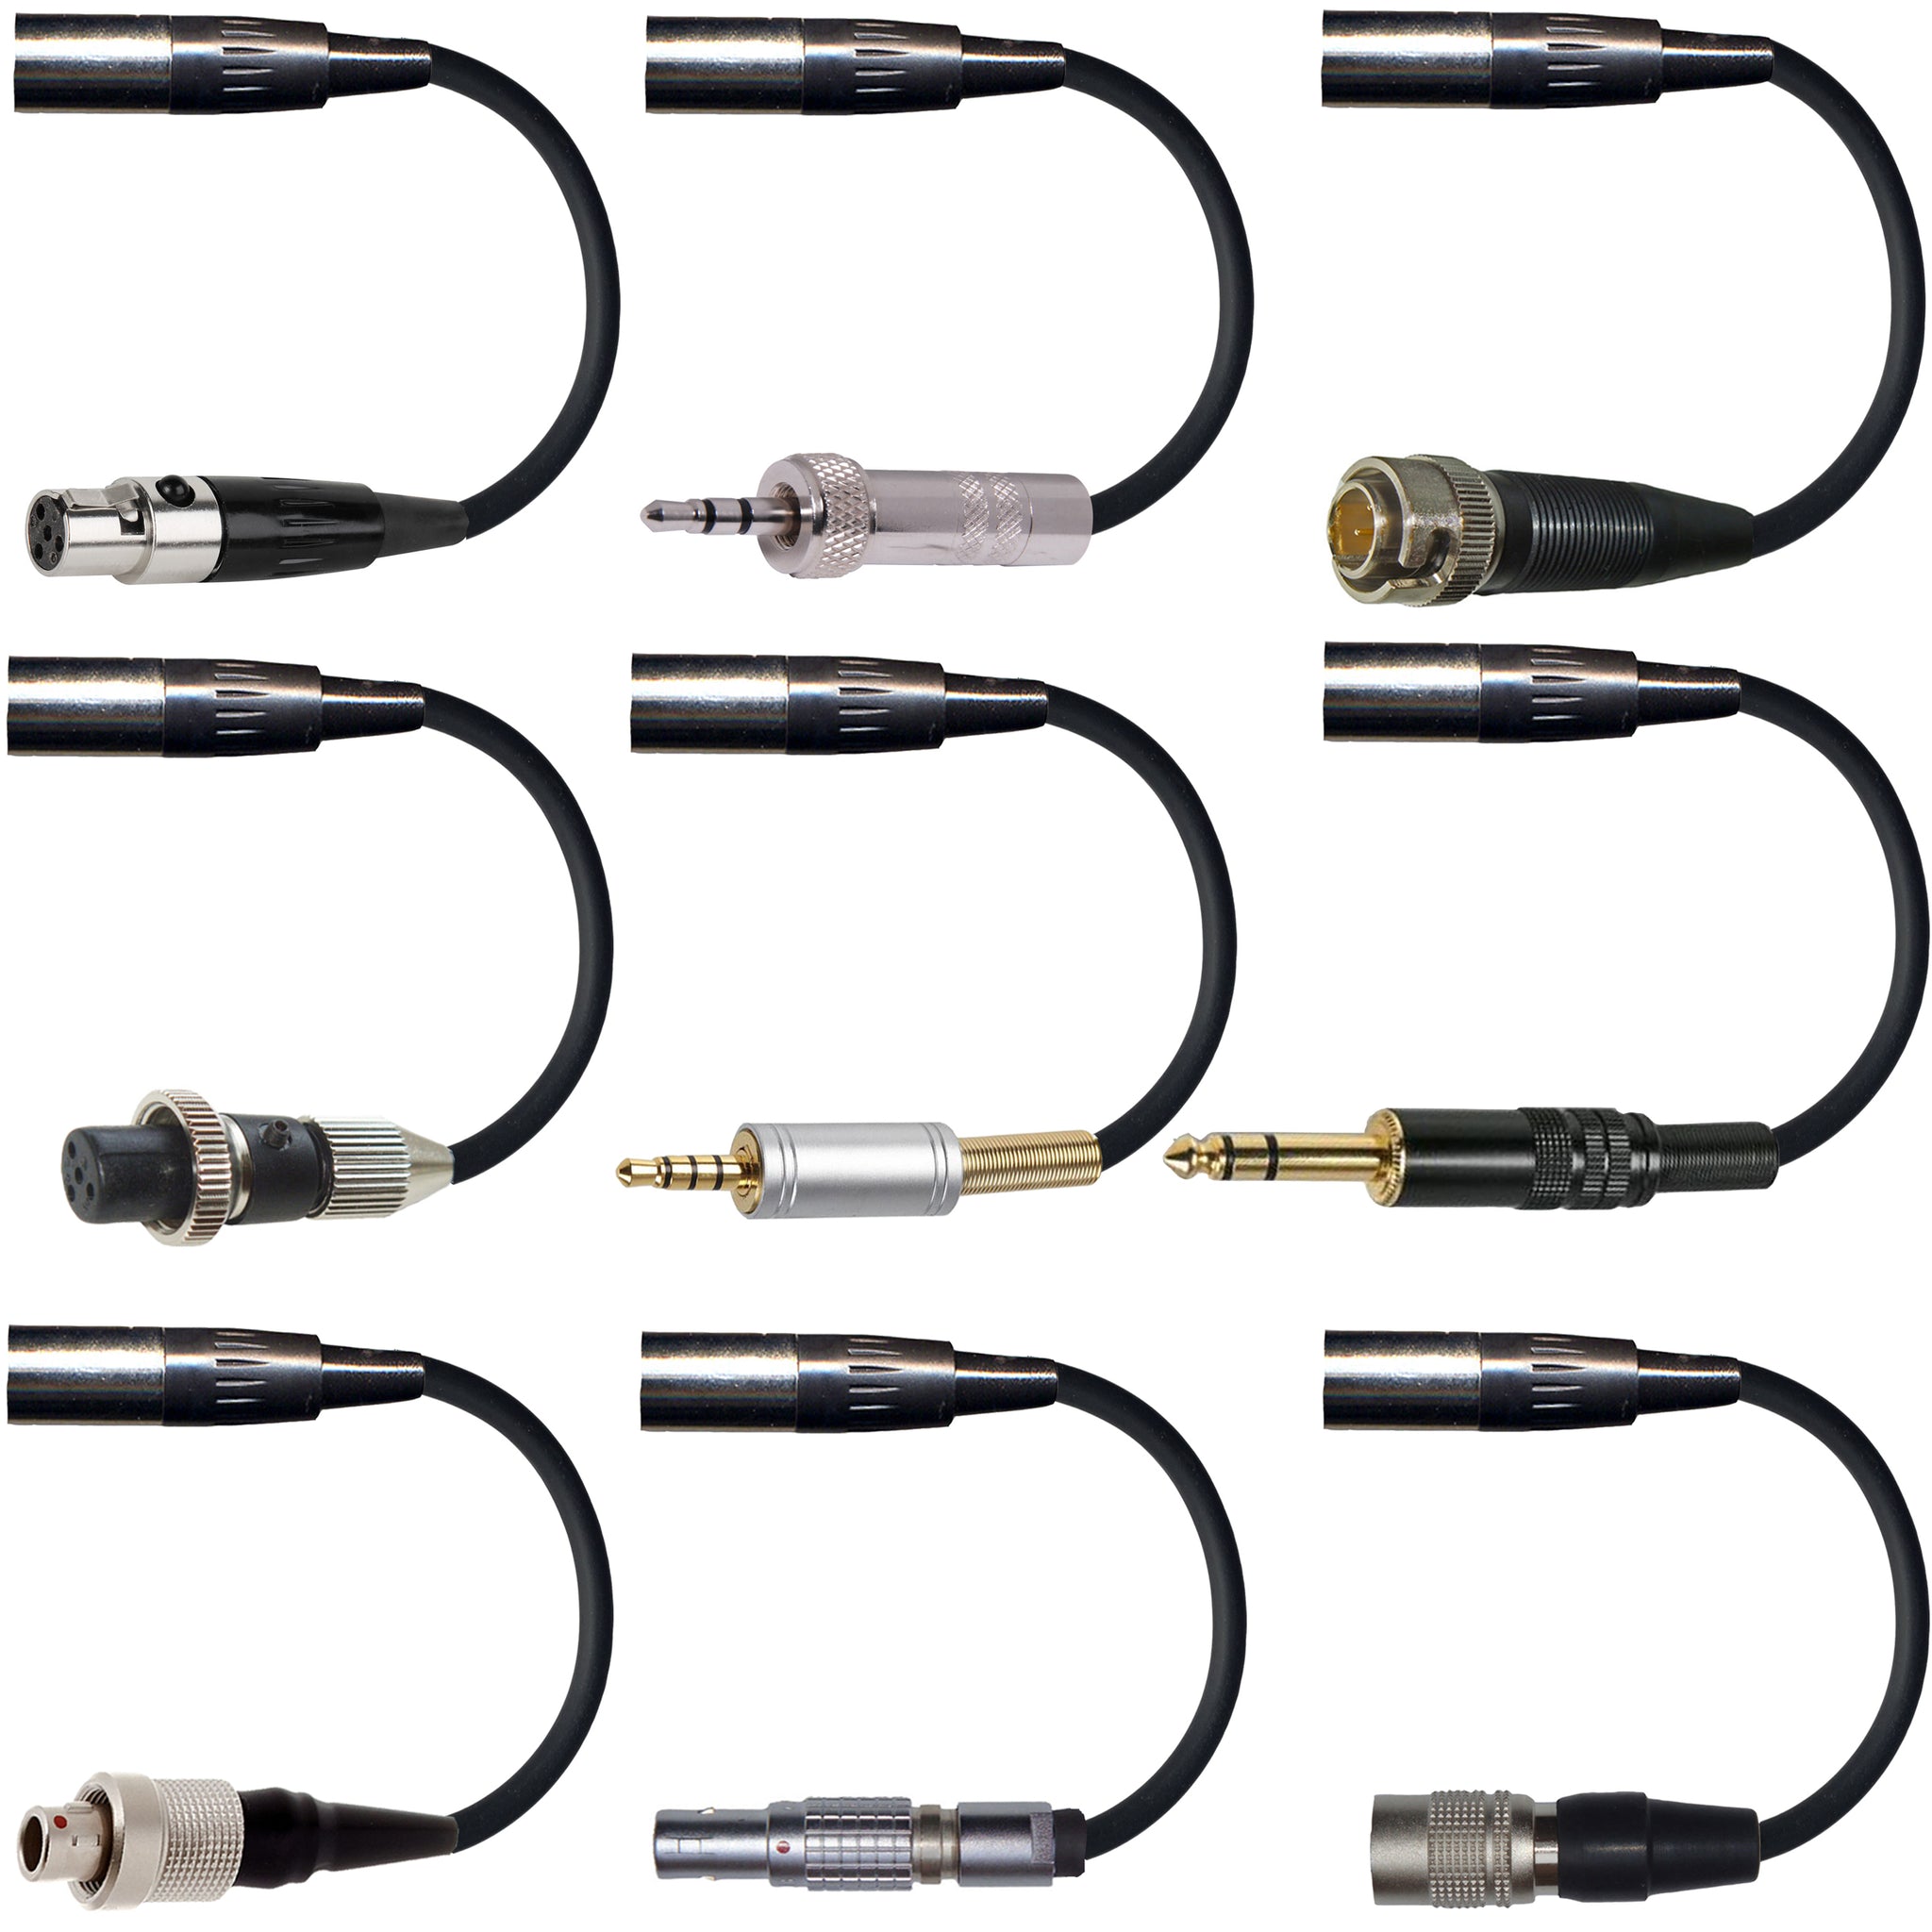 3-Pin Male to 4-Pin Male XLR Head Cable